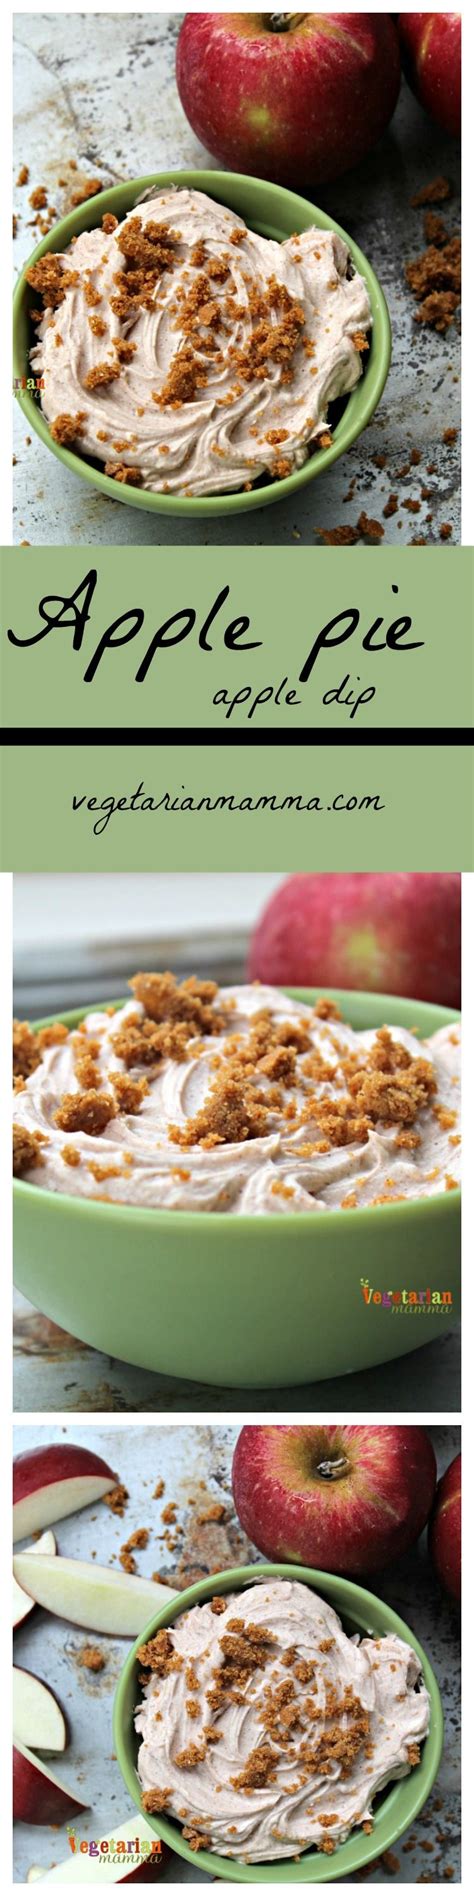 This recipe for a dairy free, gluten free, and vegan version of peanut butter cups comes together in 20 minutes and is finished in 35. Apple Pie Dip - Gluten Free, Dairy Free, Nut Free Delicious Fall Snack @enjoylifefoods # ...